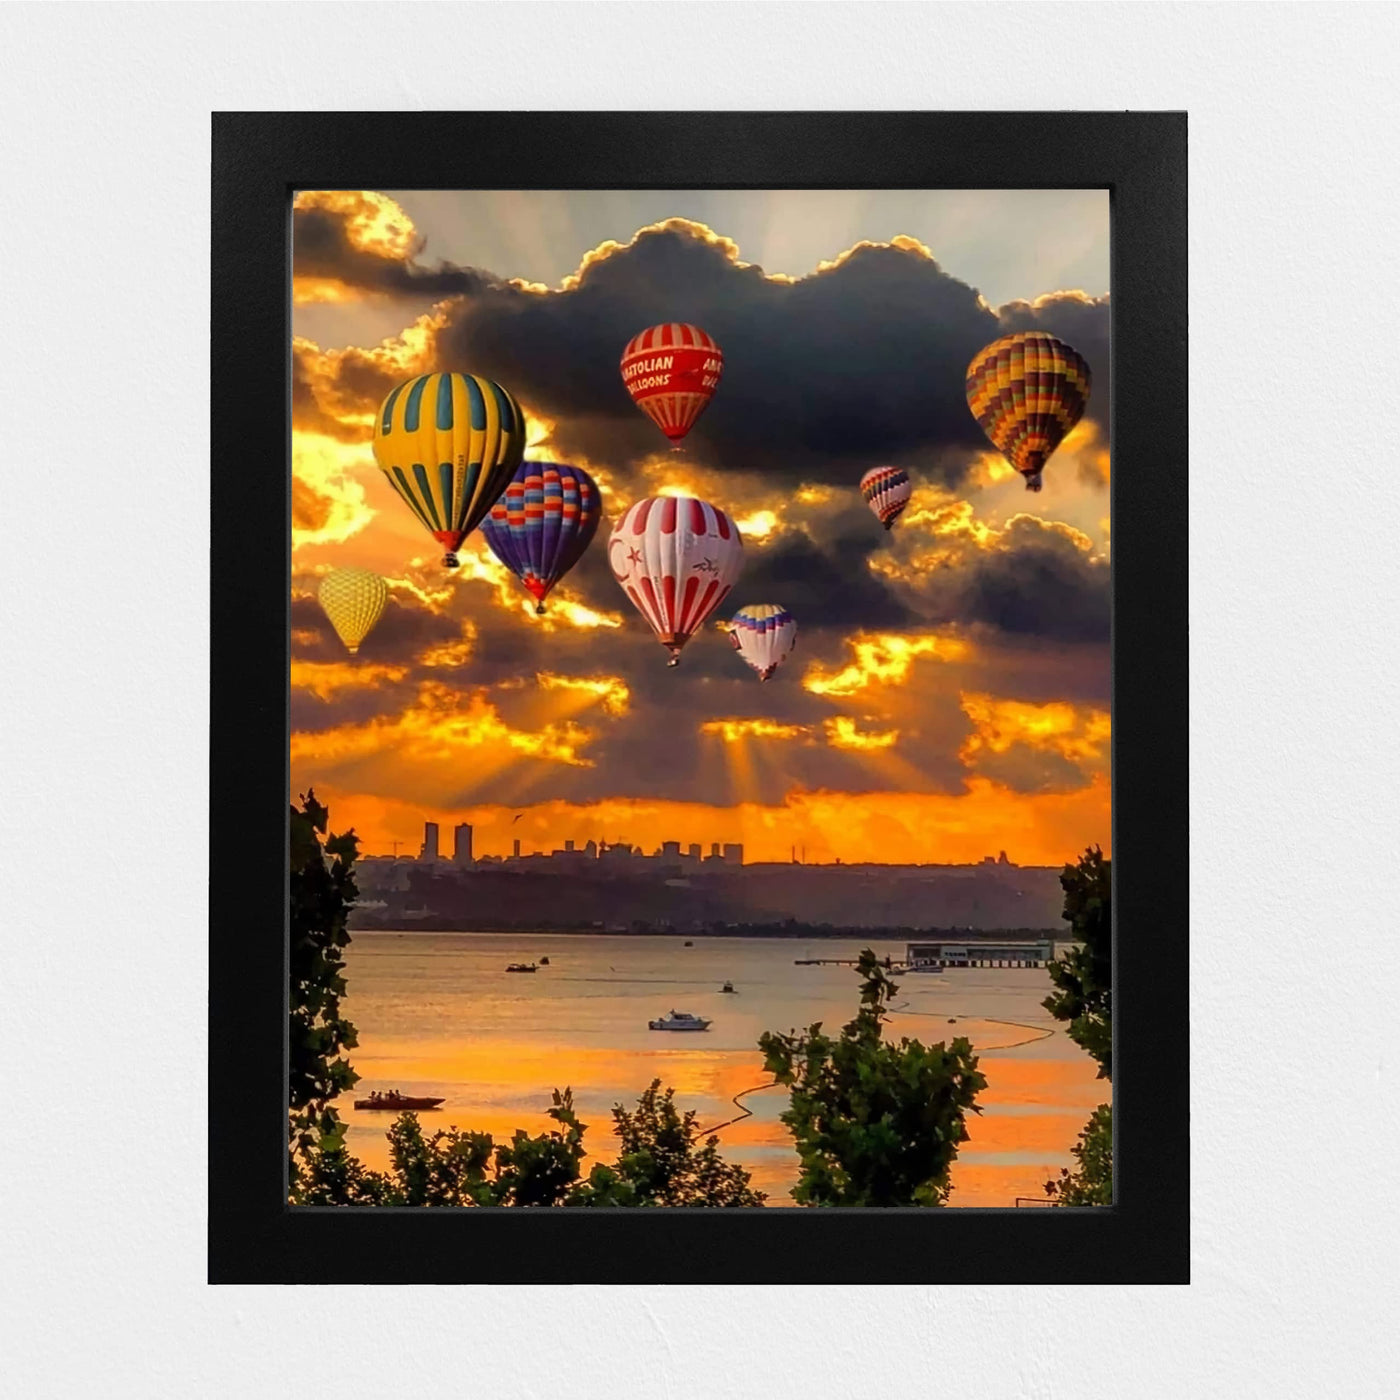 Hot Air Balloons Over the Ocean- 8 x 10" Picture Print Wall Art -Ready to Frame. Cloudy Sunrise with Balloons Over the Sea. Perfect Decor for Home-Office-Classroom. Great Gift for Flight Enthusiasts!